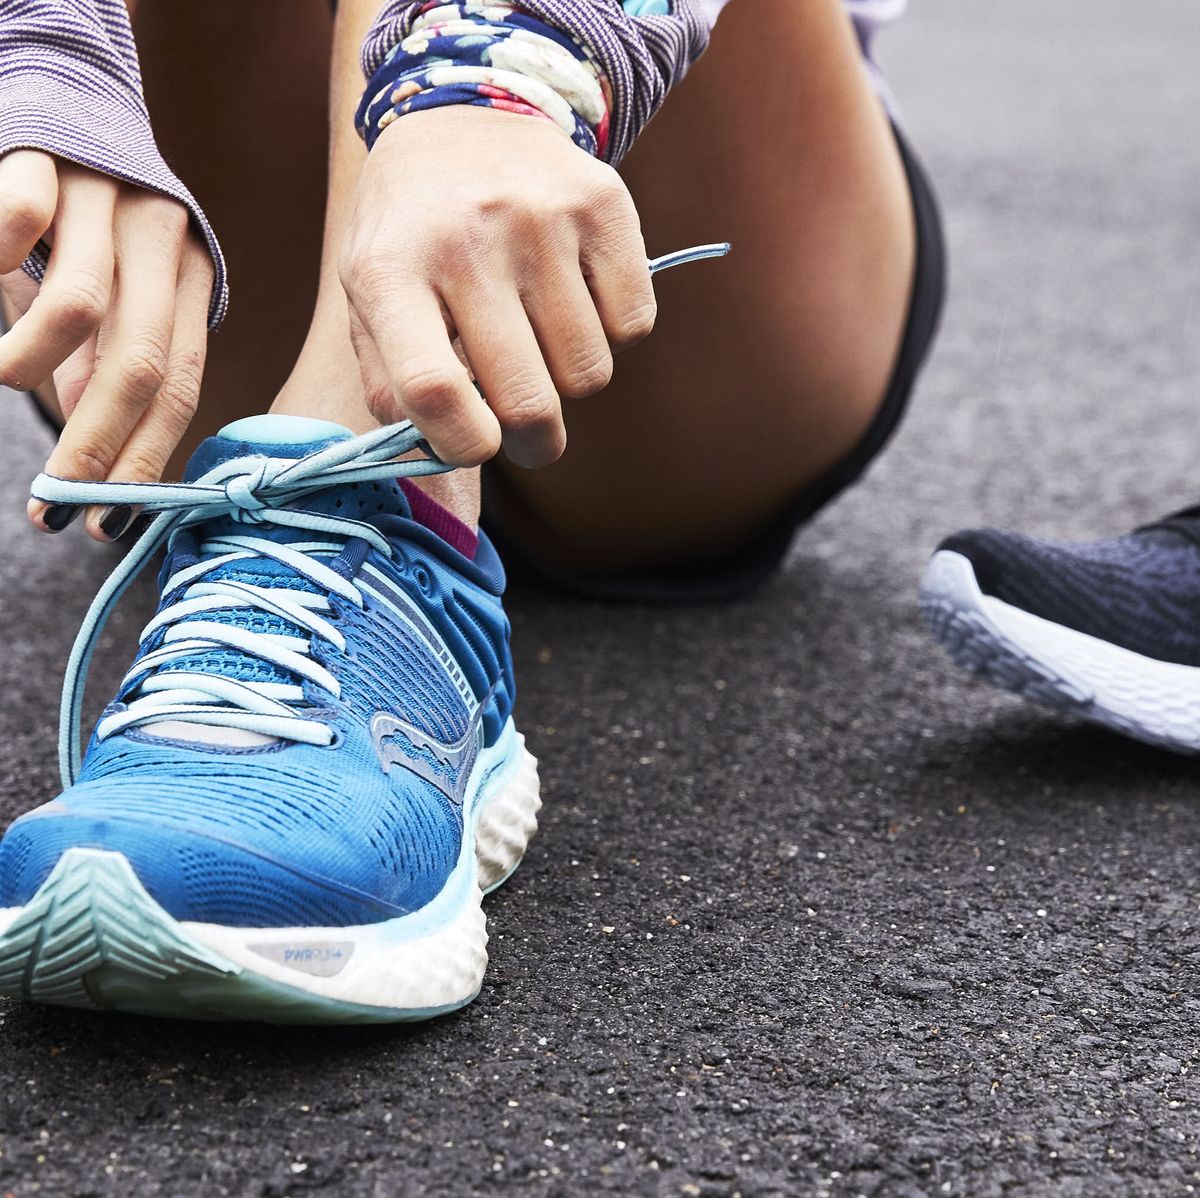 Foot Exercises | Your Running Shoes May Be Making Your Feet Weaker